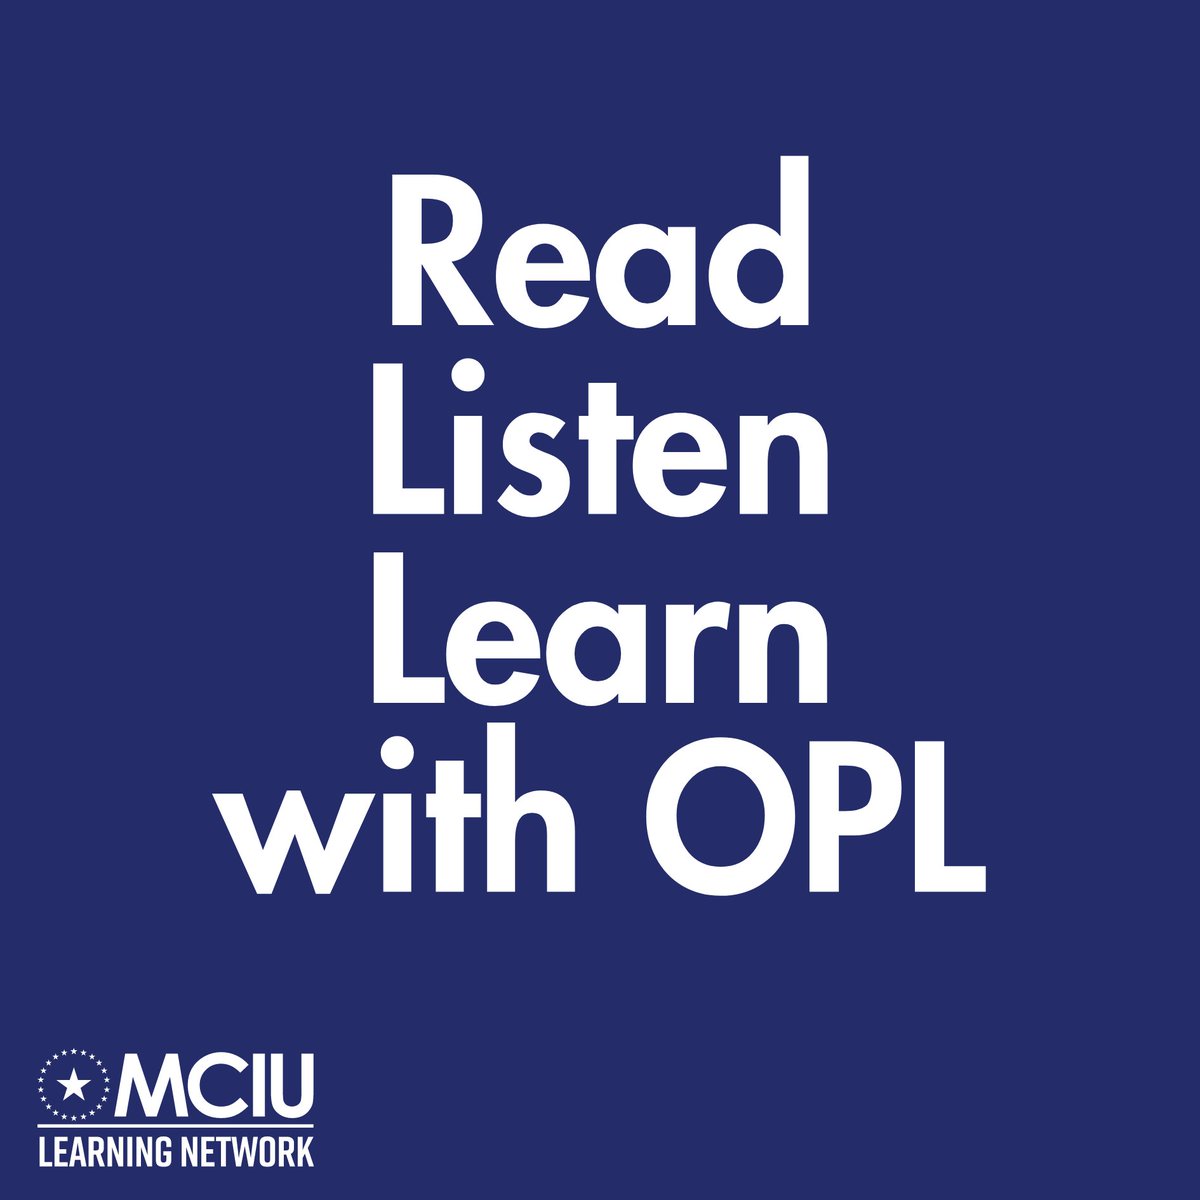 Are you ready to READ, LISTEN, and LEARN with @MCIULearns? Check out our latest learning opportunities for all educators and subscribe to our monthly email updates at this link: learn.mciu.org/read-listen-le… Start your journey with March's edition here: learn.mciu.org/march24-read-l…